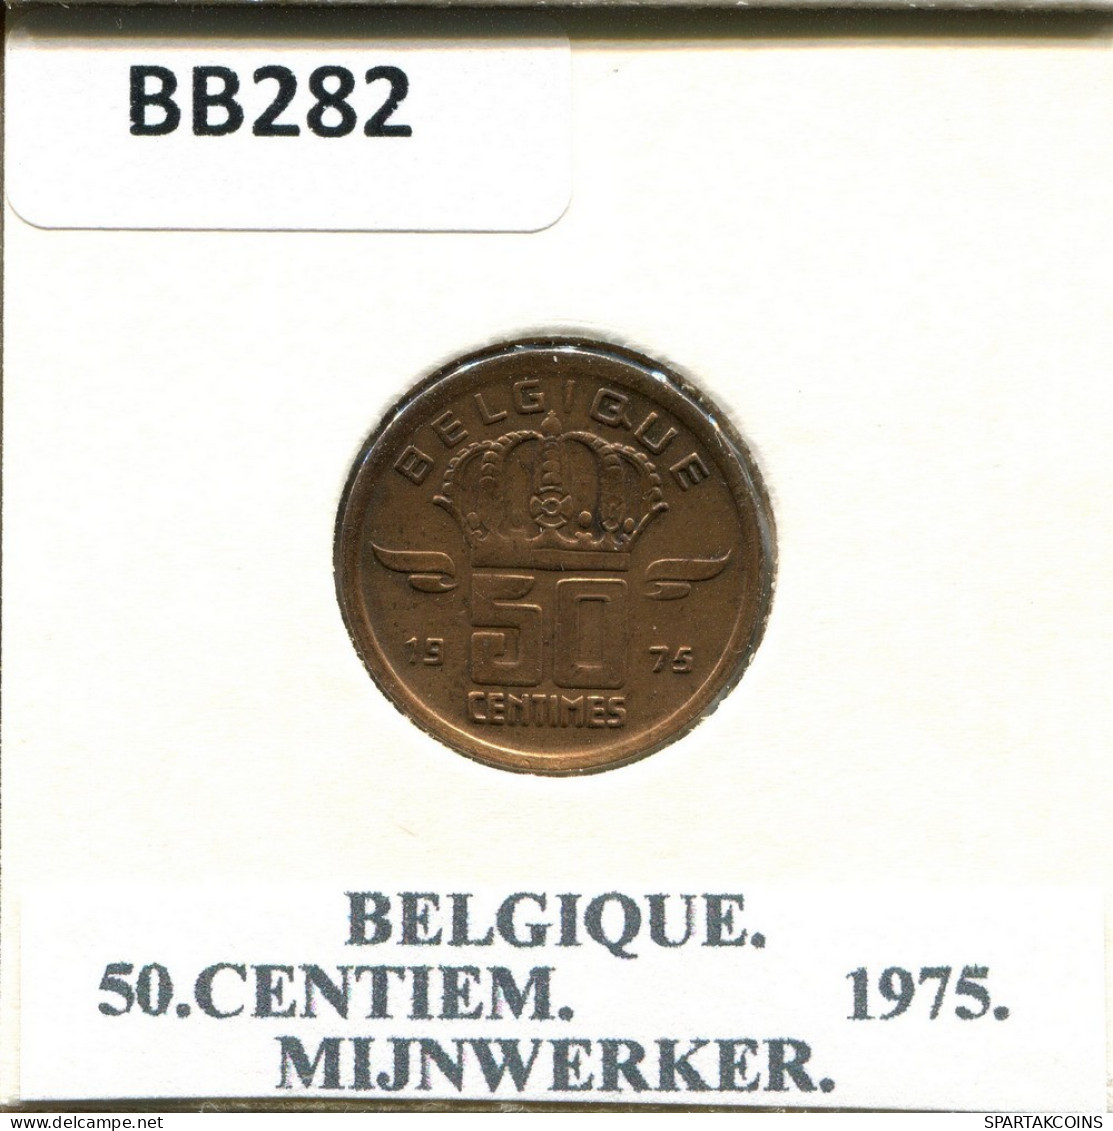 50 CENTIMES 1975 FRENCH Text BELGIUM Coin #BB282.U.A - 50 Cents